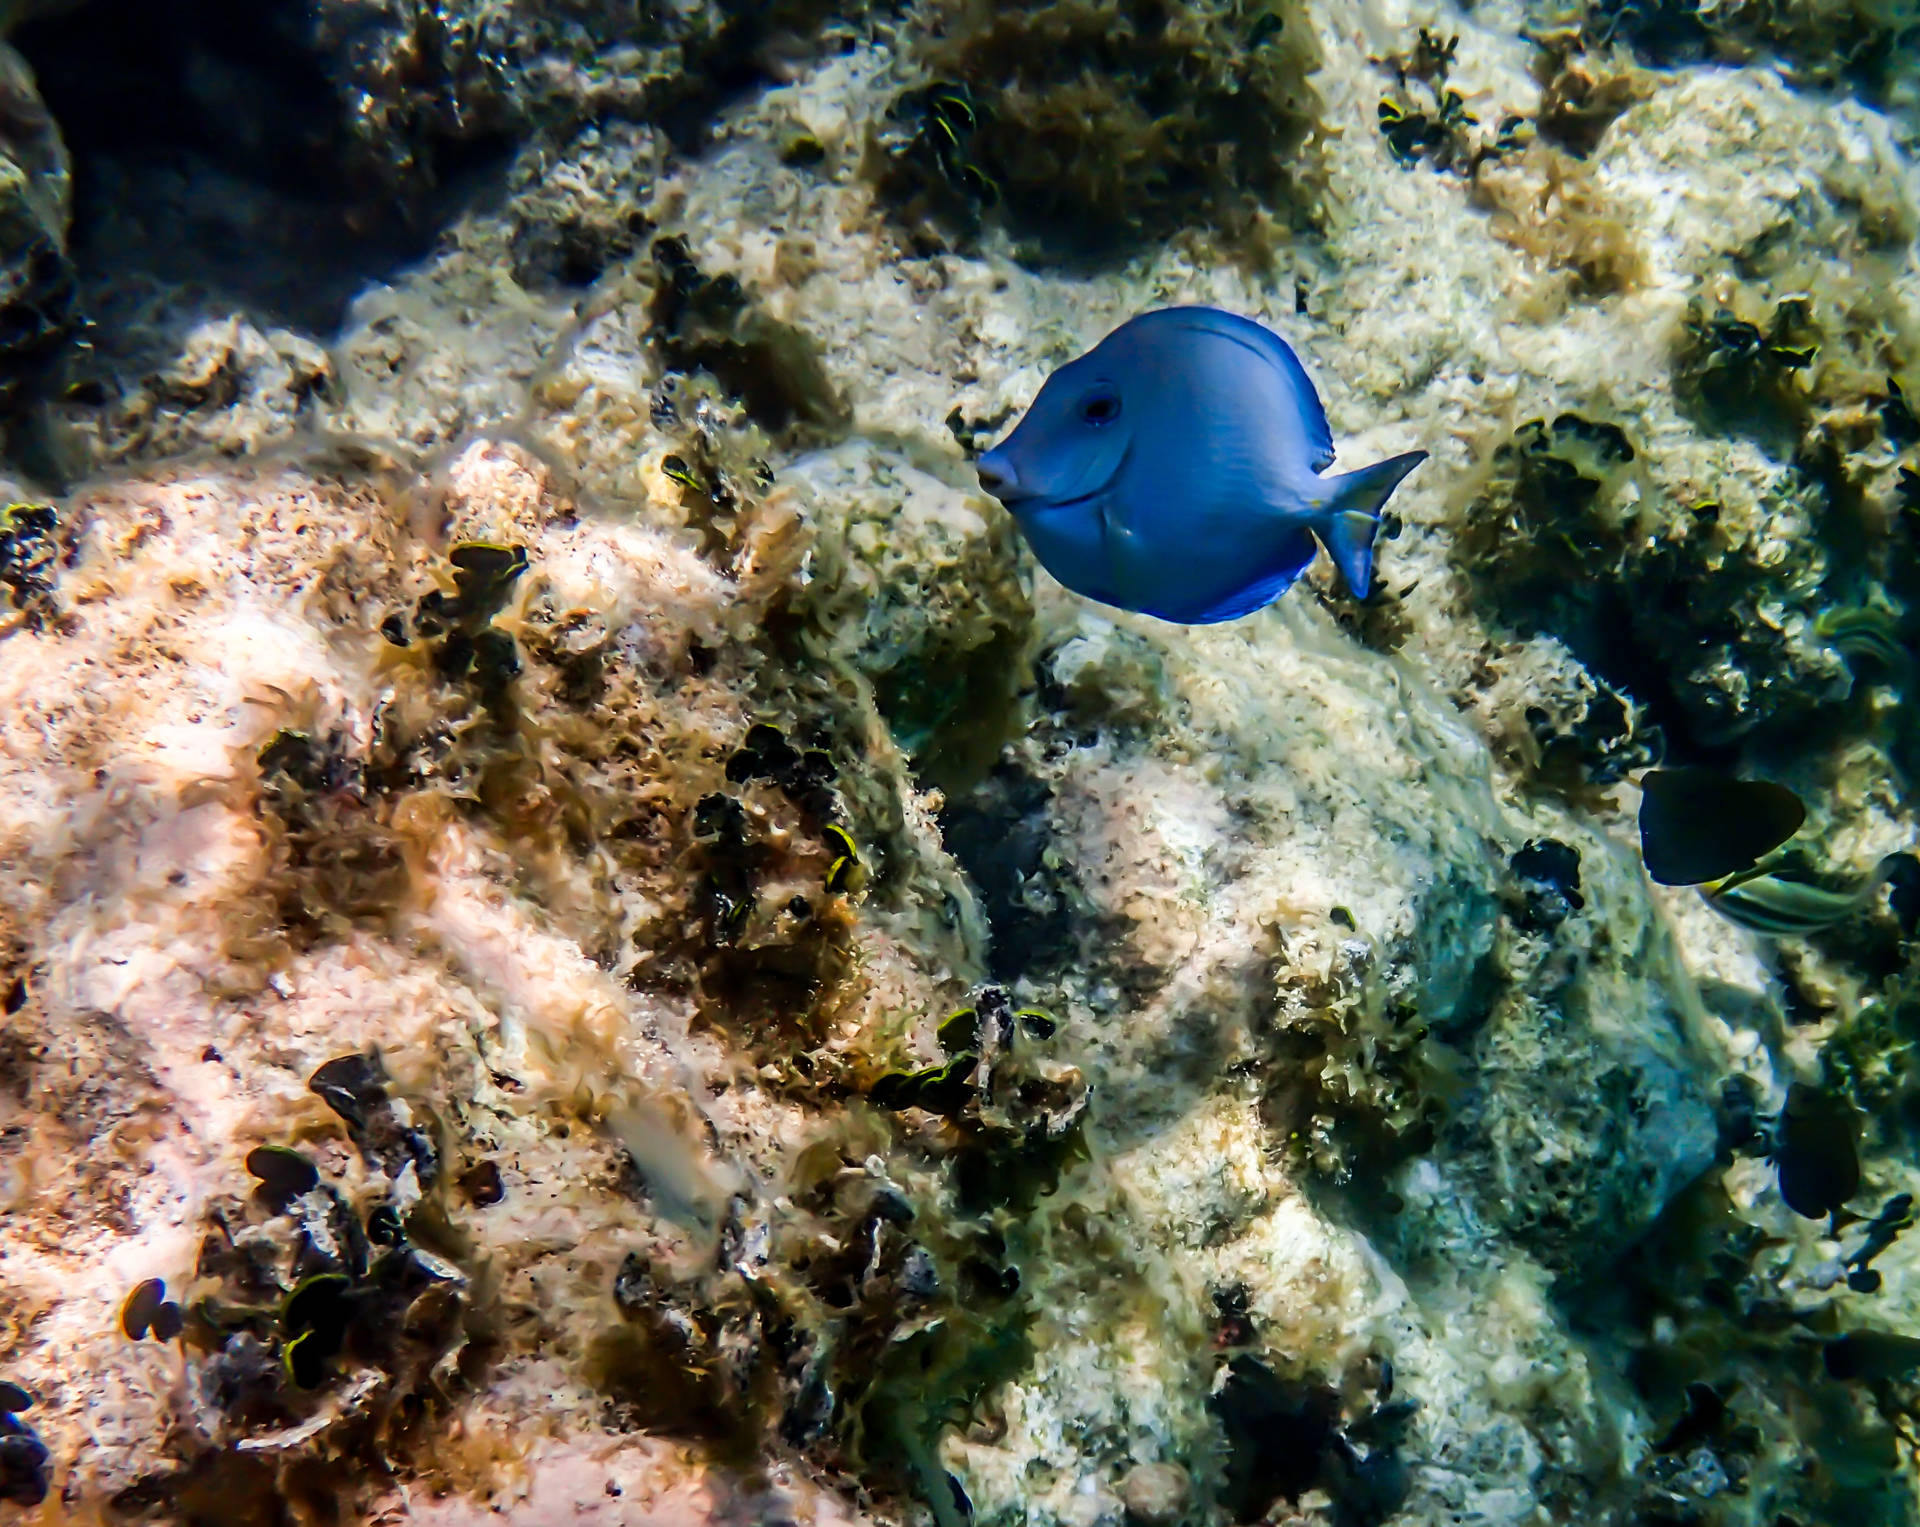 Vibrant Blue Fish In Antigua And Barbuda's Waters